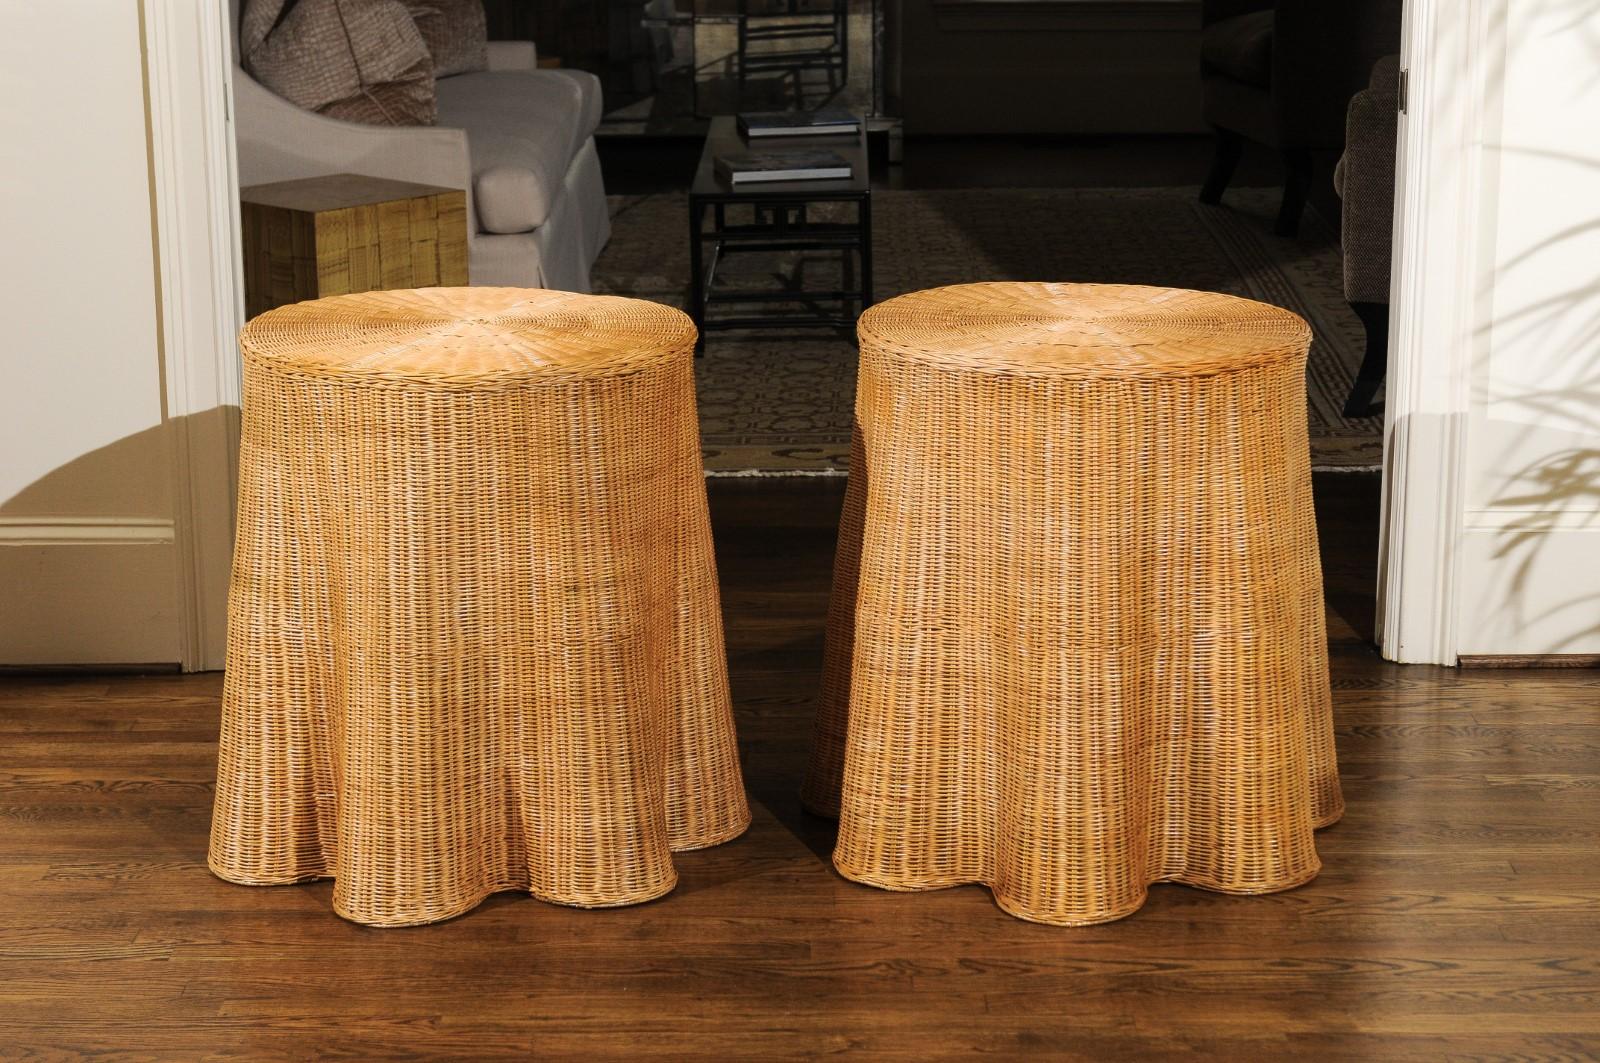 An exquisite pair of difficult to find vintage Trompe L'oiel Wicker end tables. Fabulous design, craftsmanship and execution - aged to absolute perfection. A magnificent dramatic illusion! Excellent restored condition. The tables have been